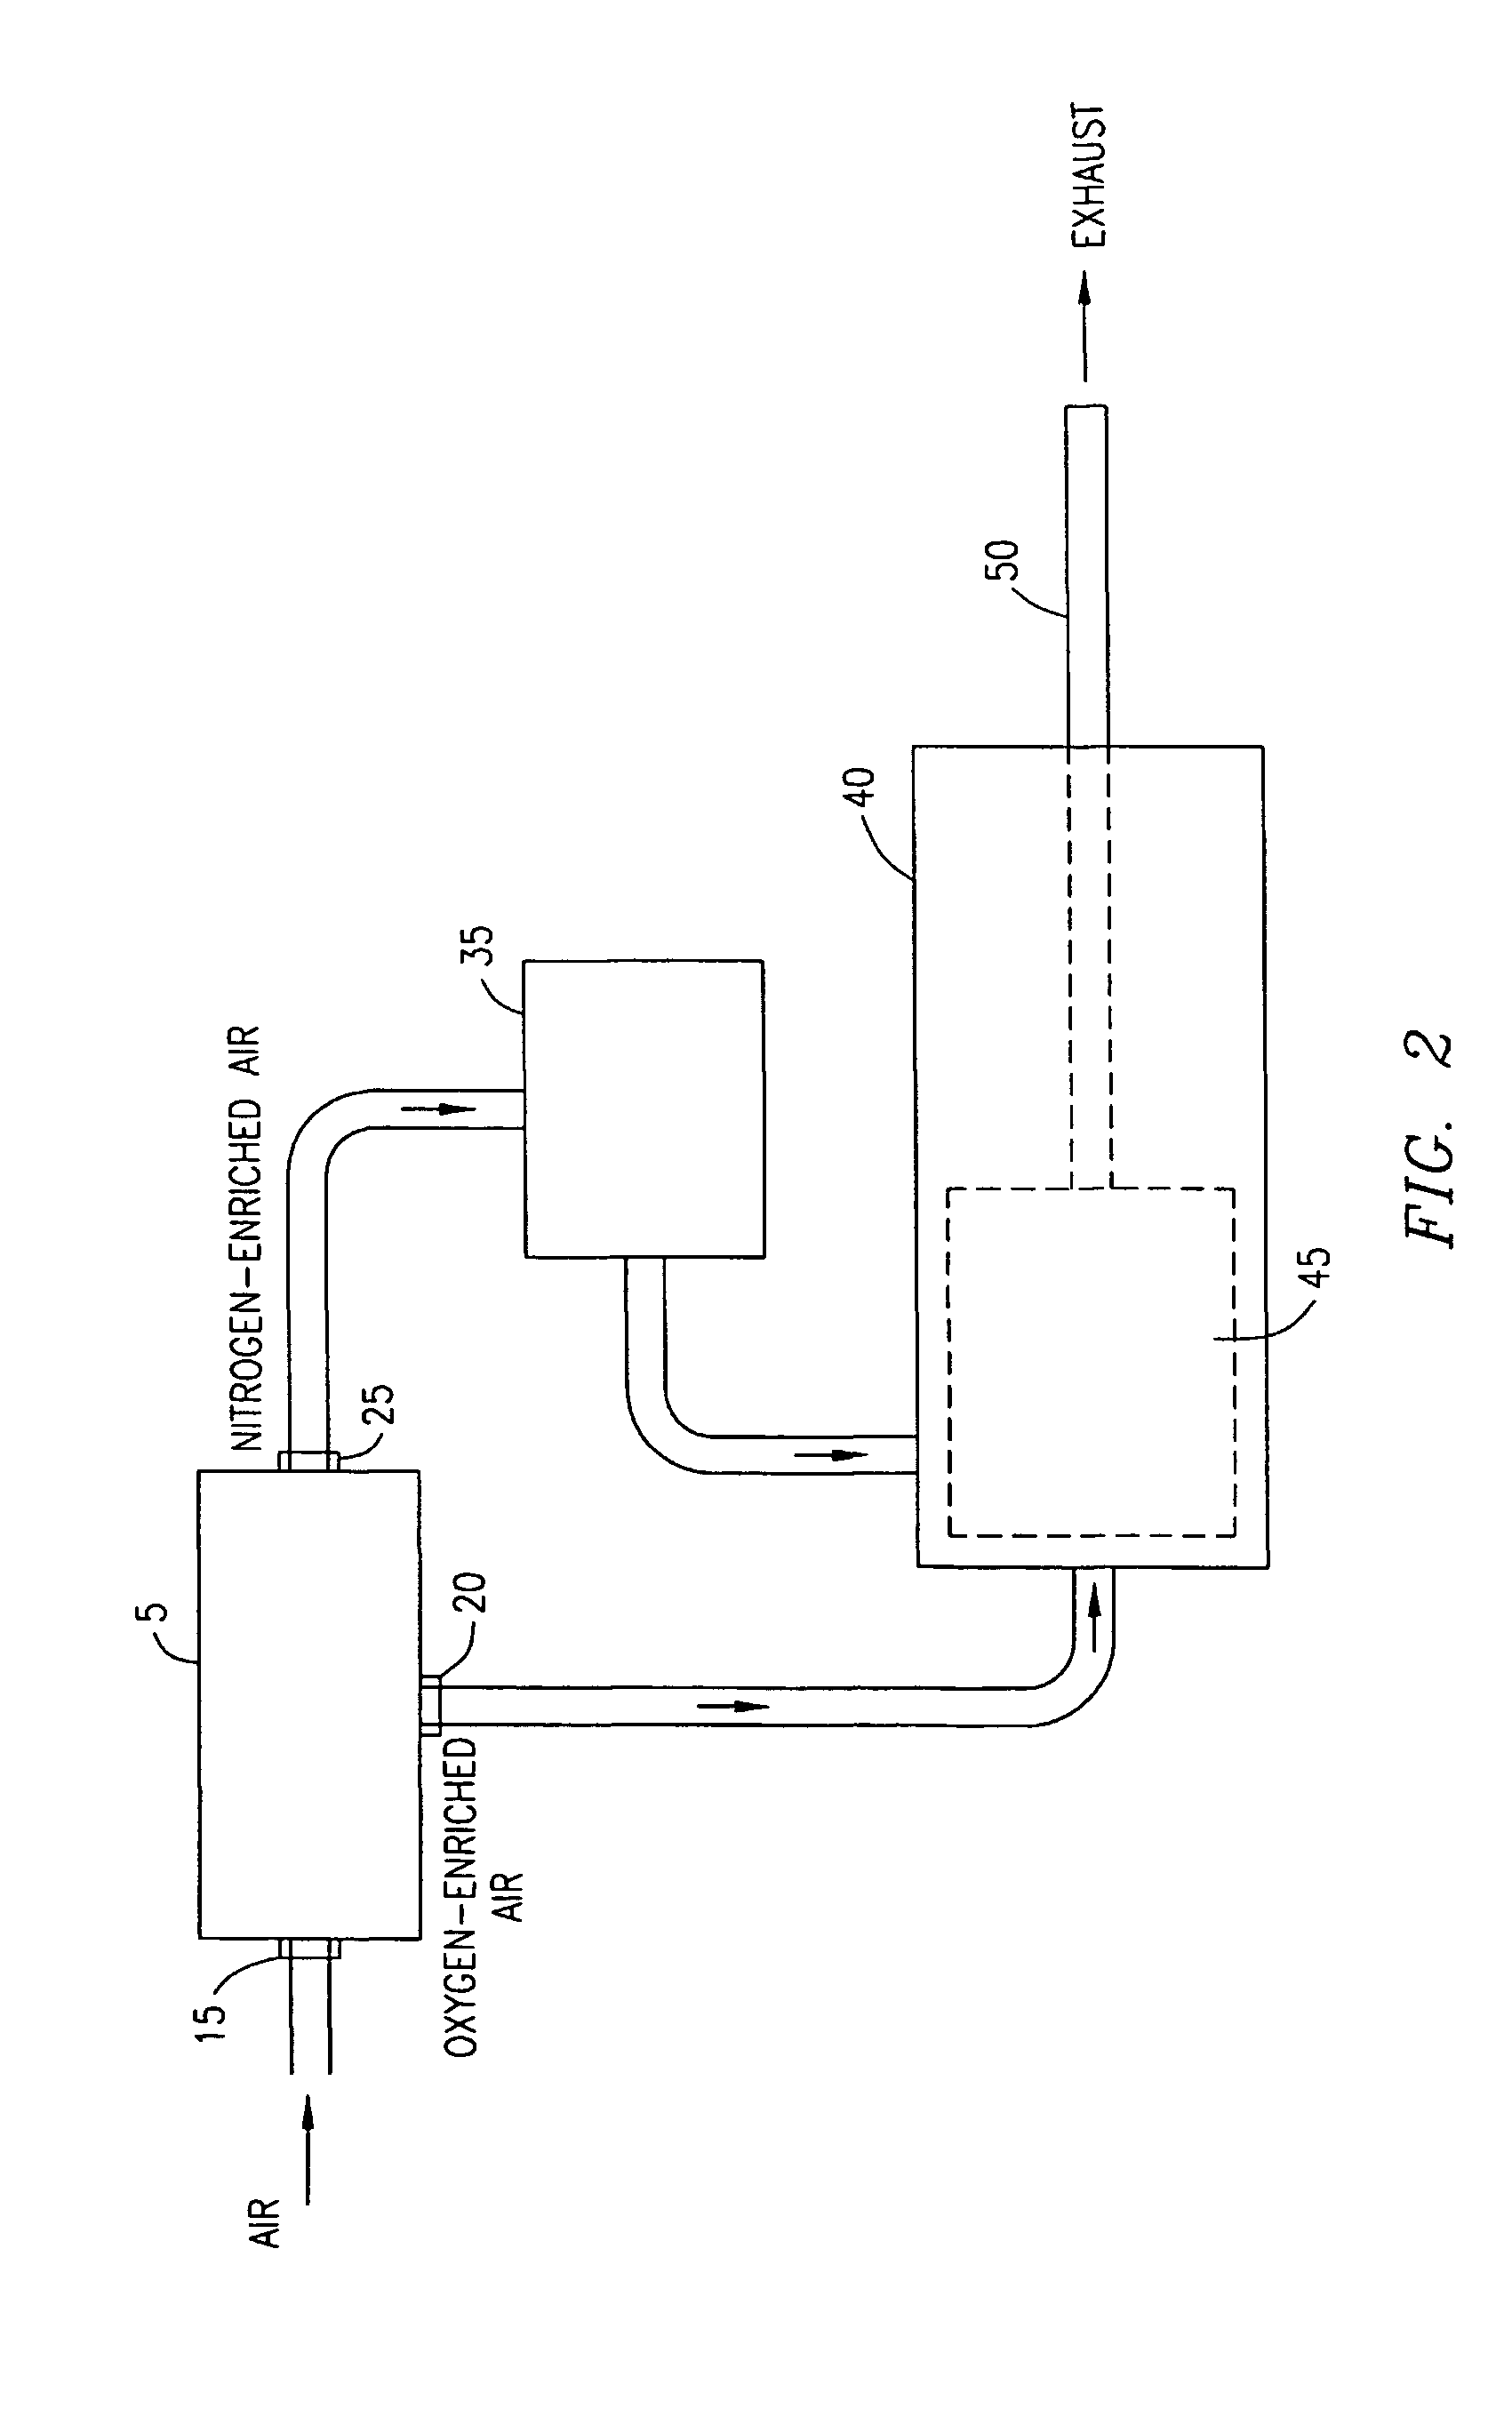 Method and apparatus for membrane separation of air into nitrogen and oxygen elements for use in internal combustion engines